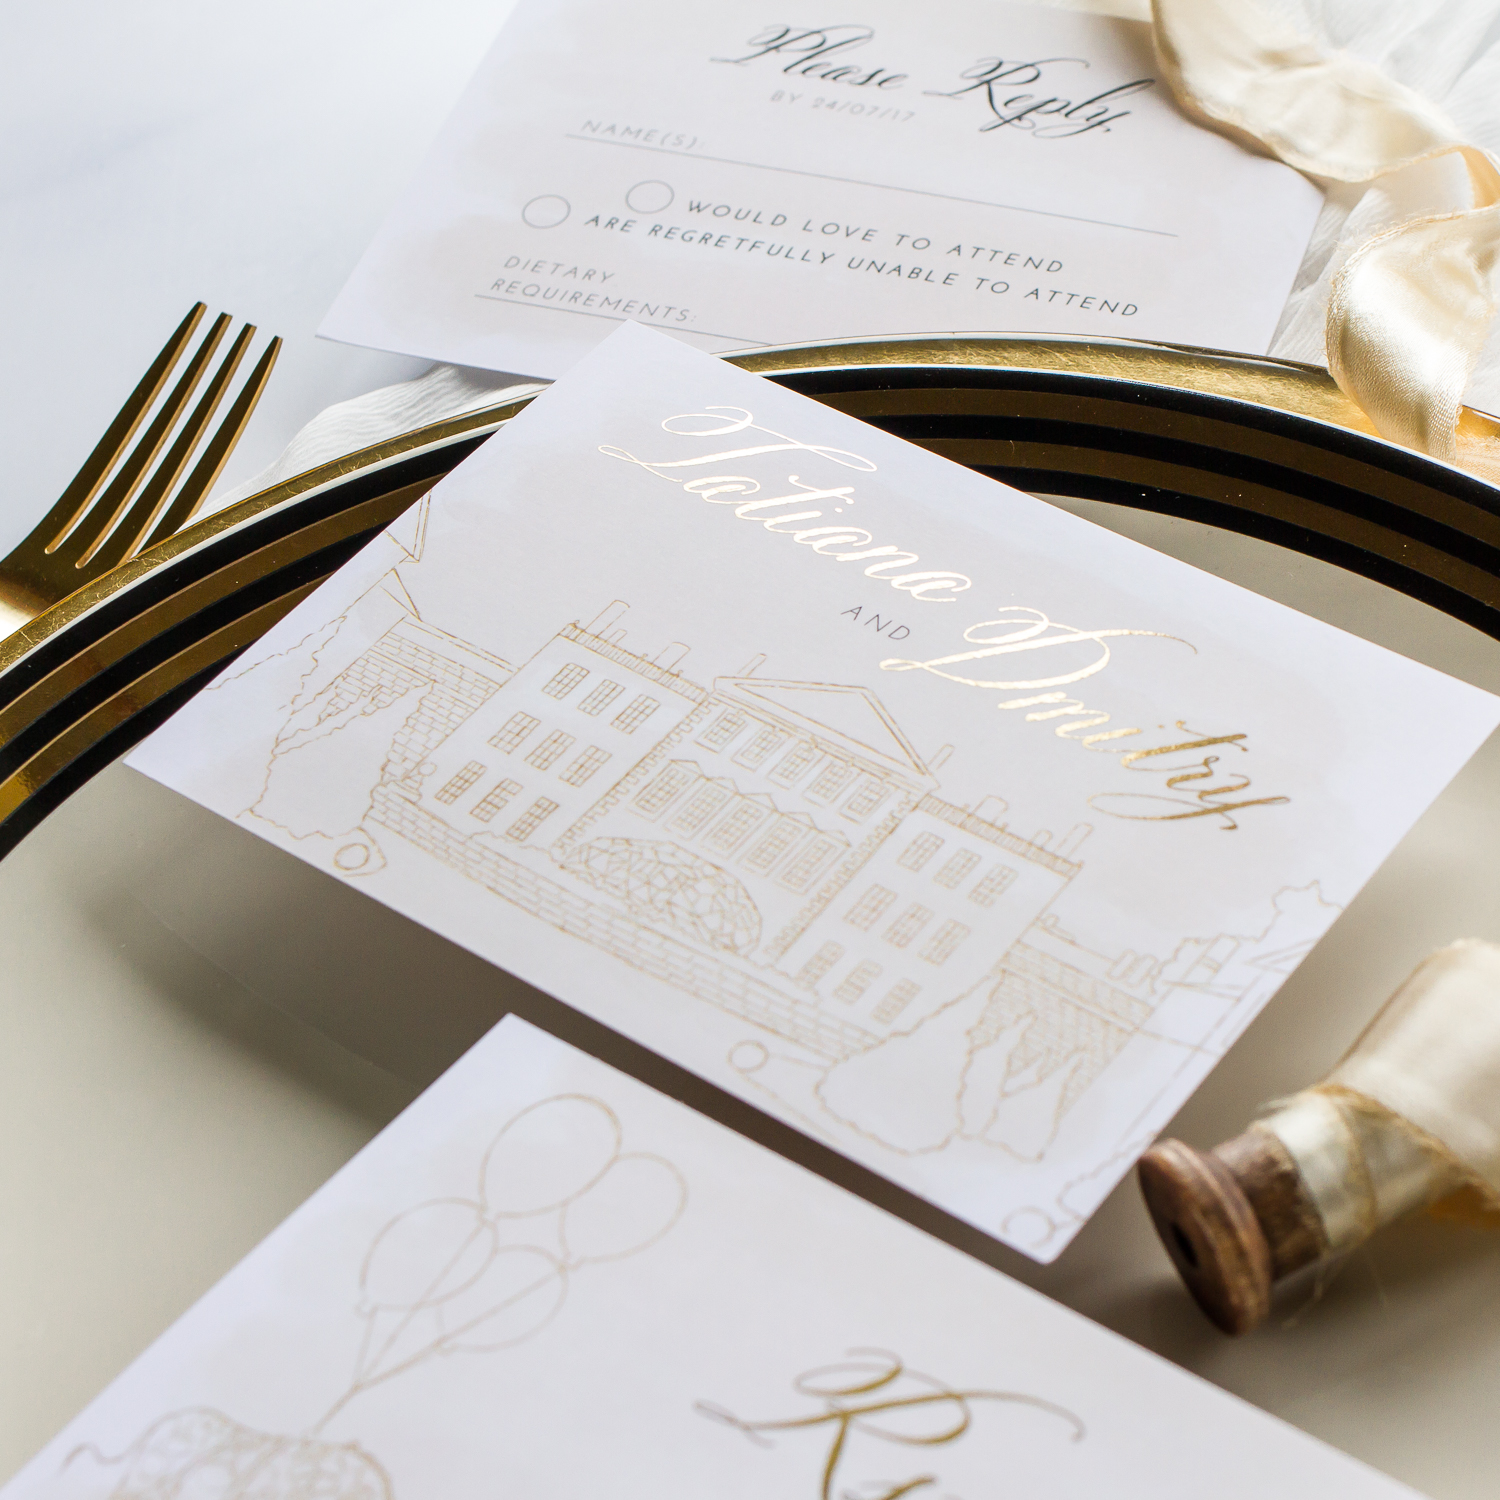 Tatiana & Dmitry Unique Wedding Invitations Hand Illustrated with Gold Foil Details 2 - Pingle Pie.jpg